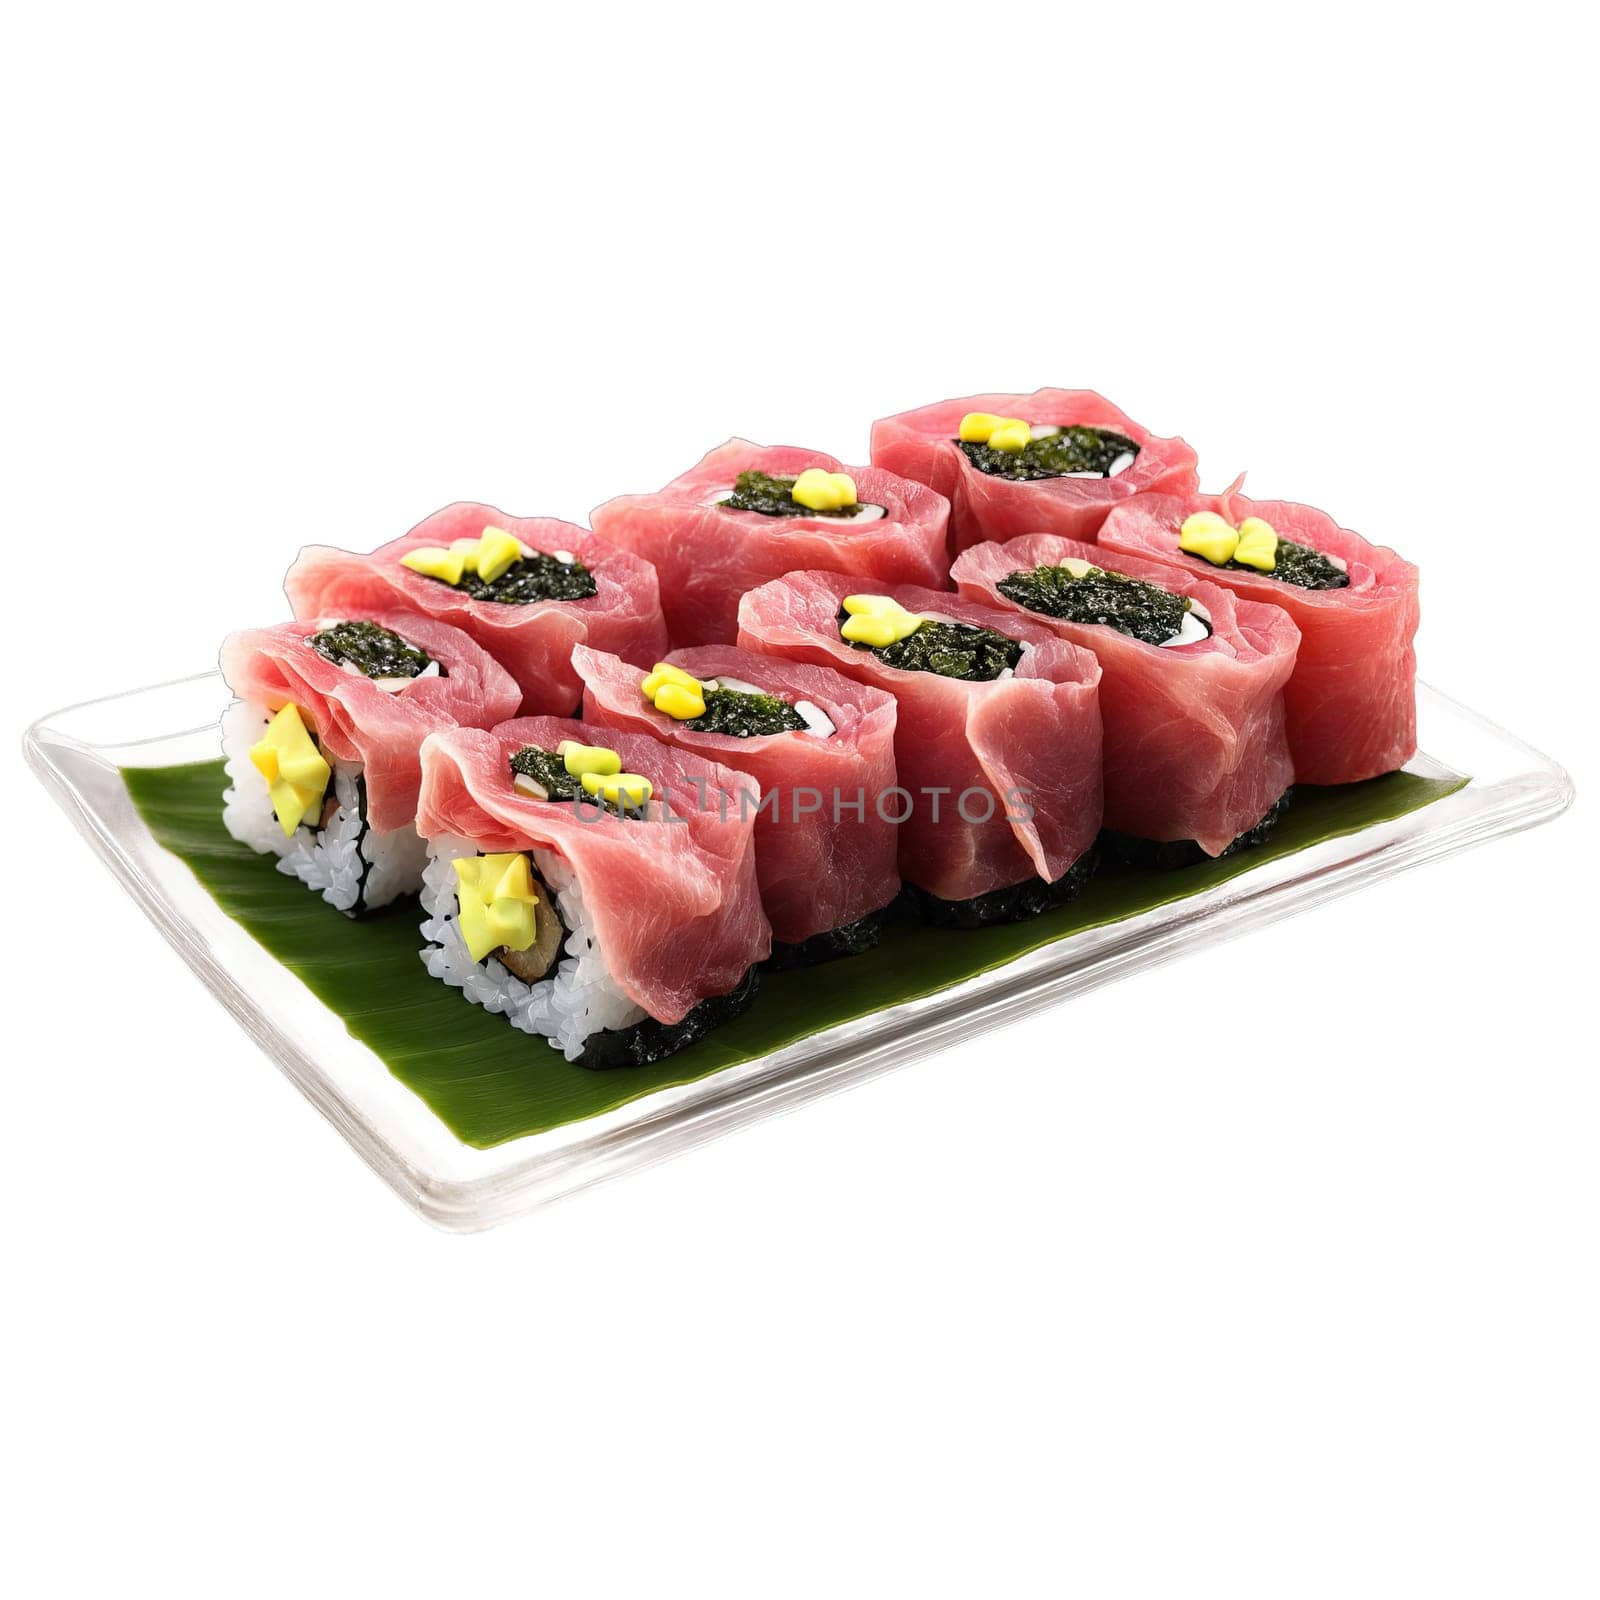 Beef carpaccio sushi tissue thin raw beef slice nori wrapped rice cube in glass dish. Food isolated on transparent background.